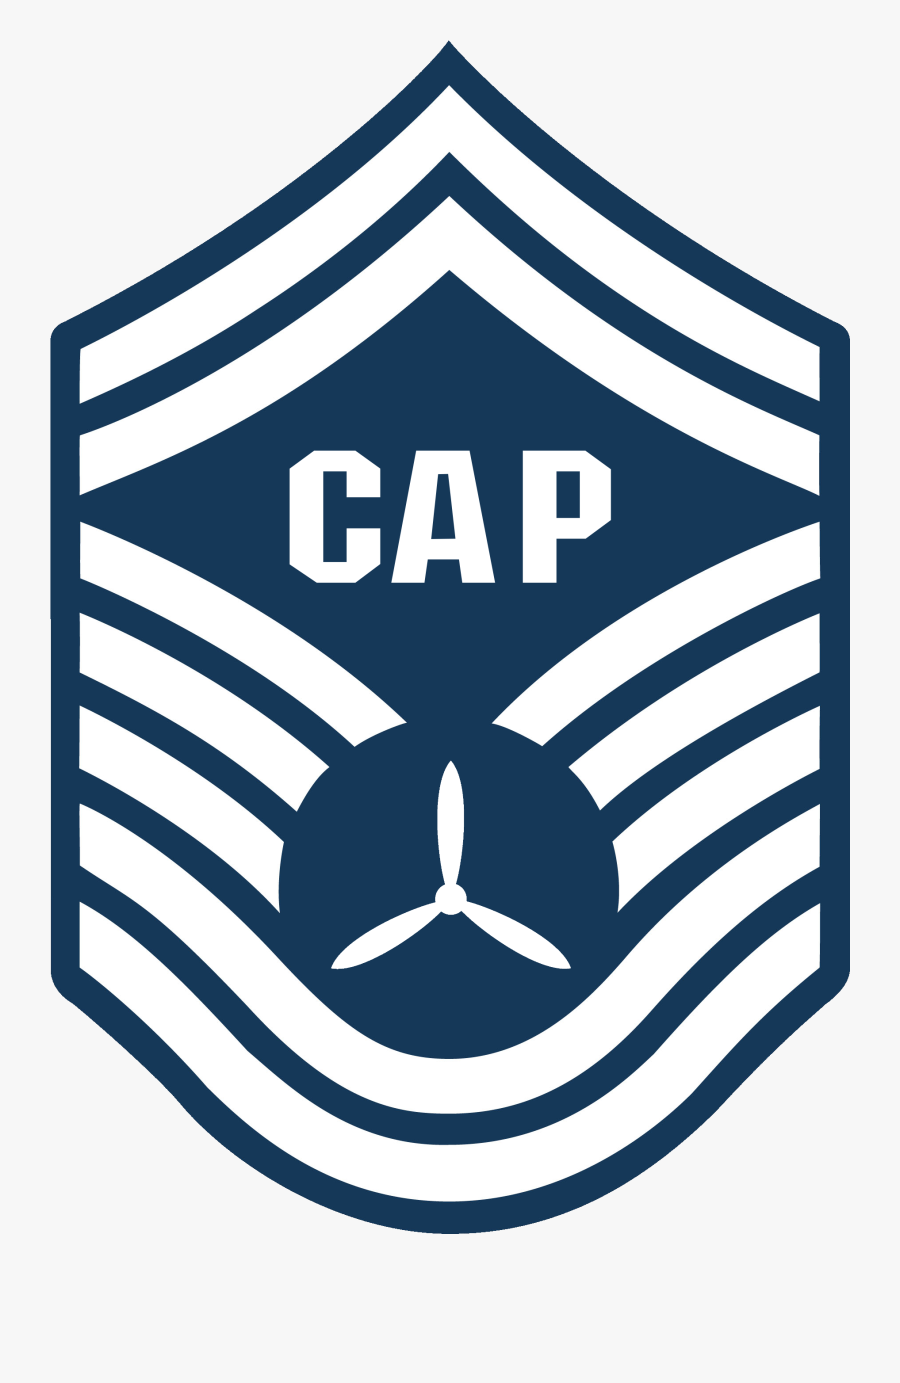 Chief Master Sergeant Of The Air Force Rank, Transparent Clipart